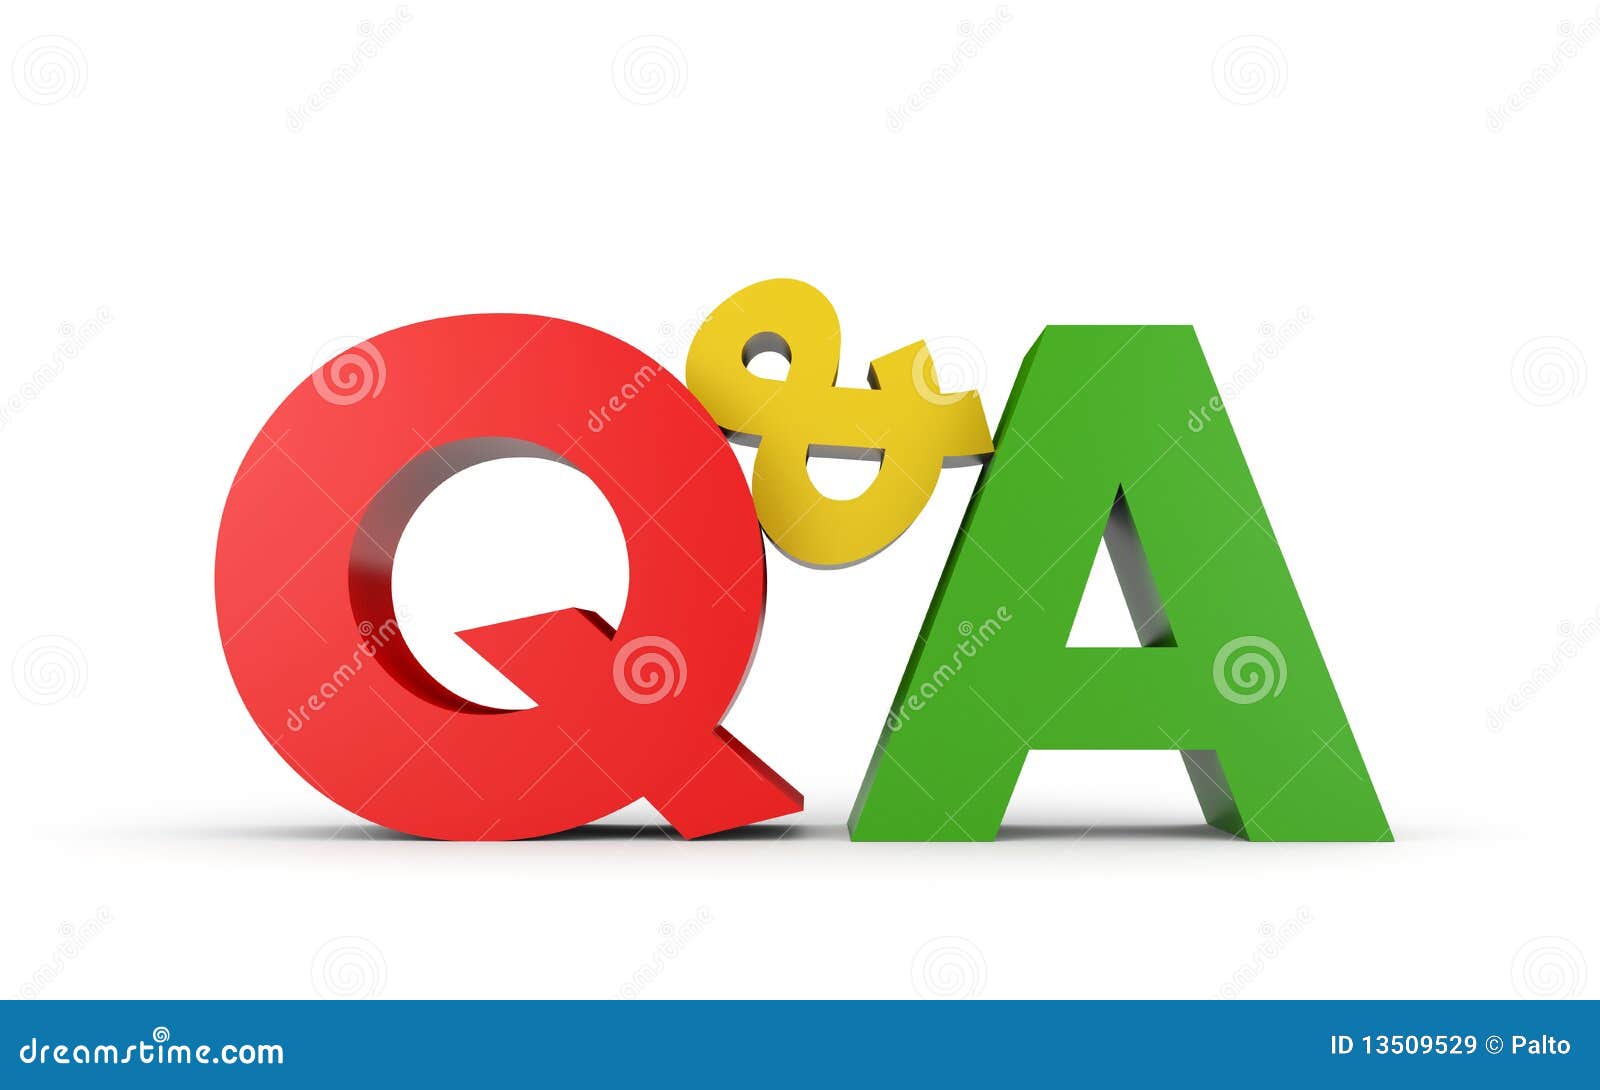 clipart of question and answer - photo #2